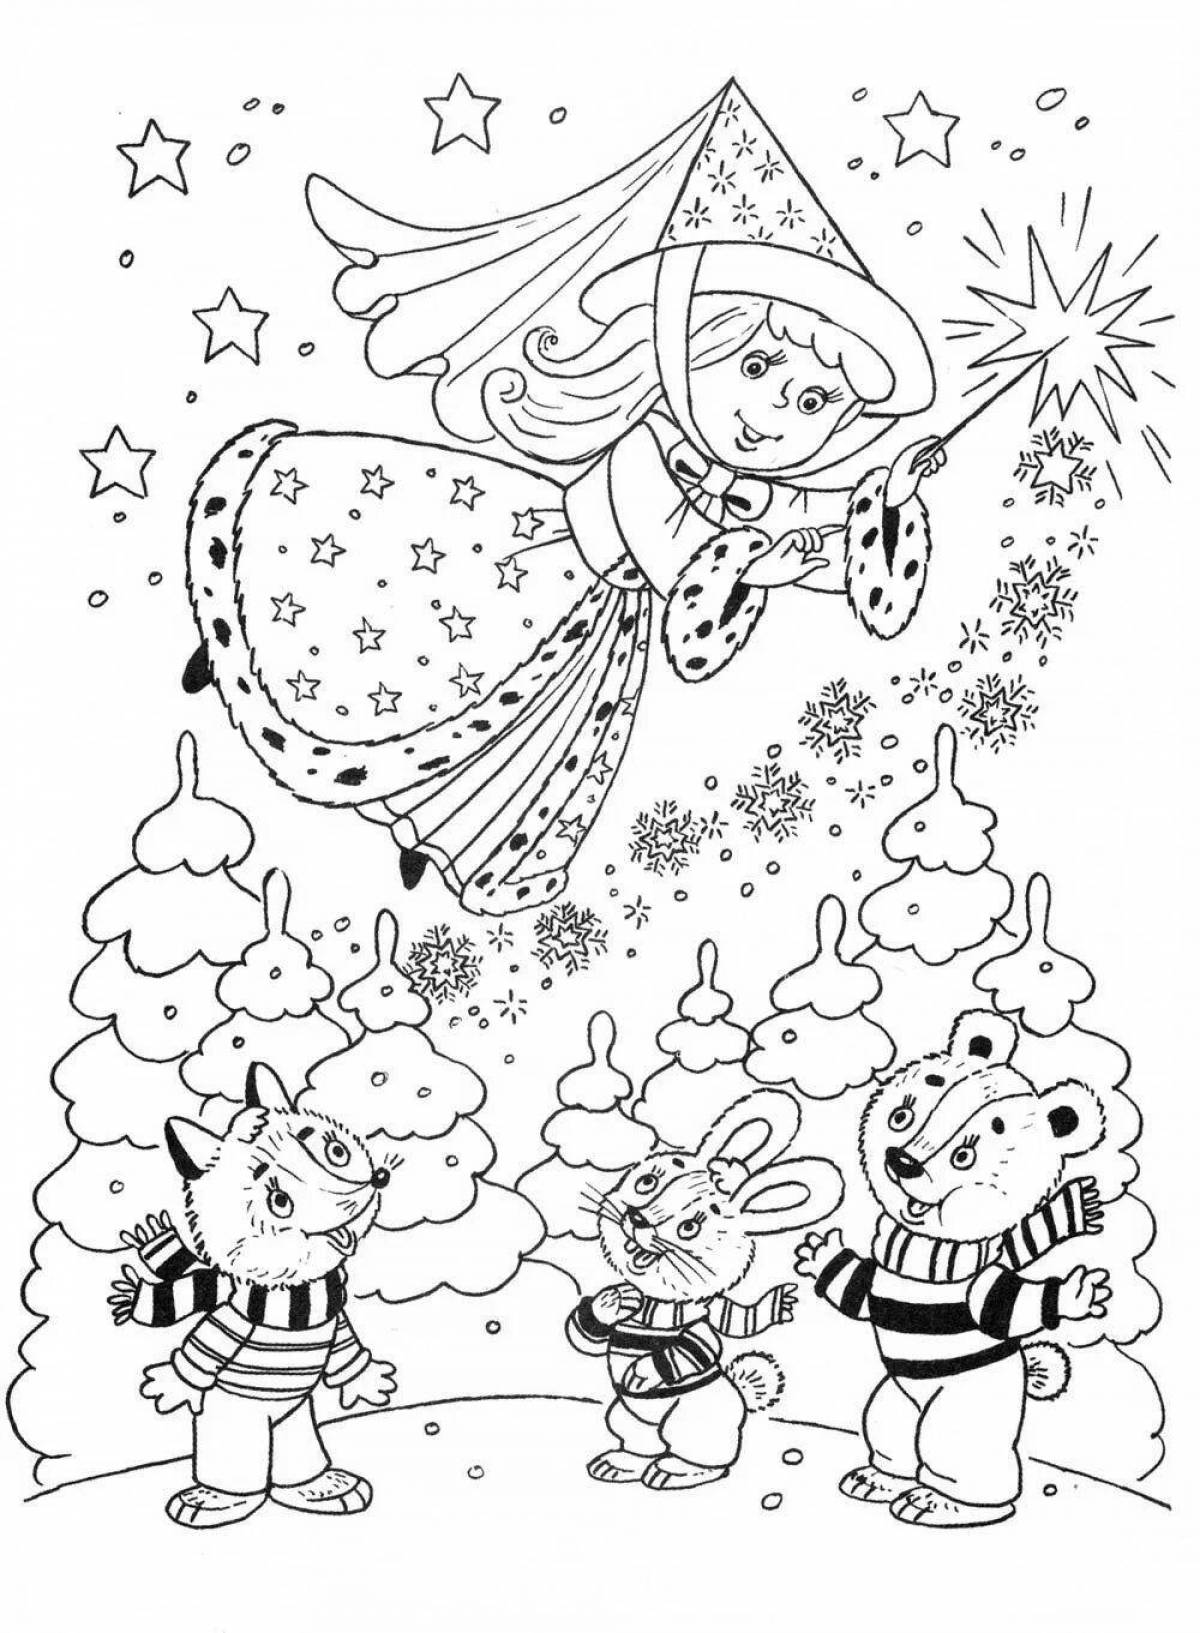 Whimsical winter coloring book for children 6-7 years old